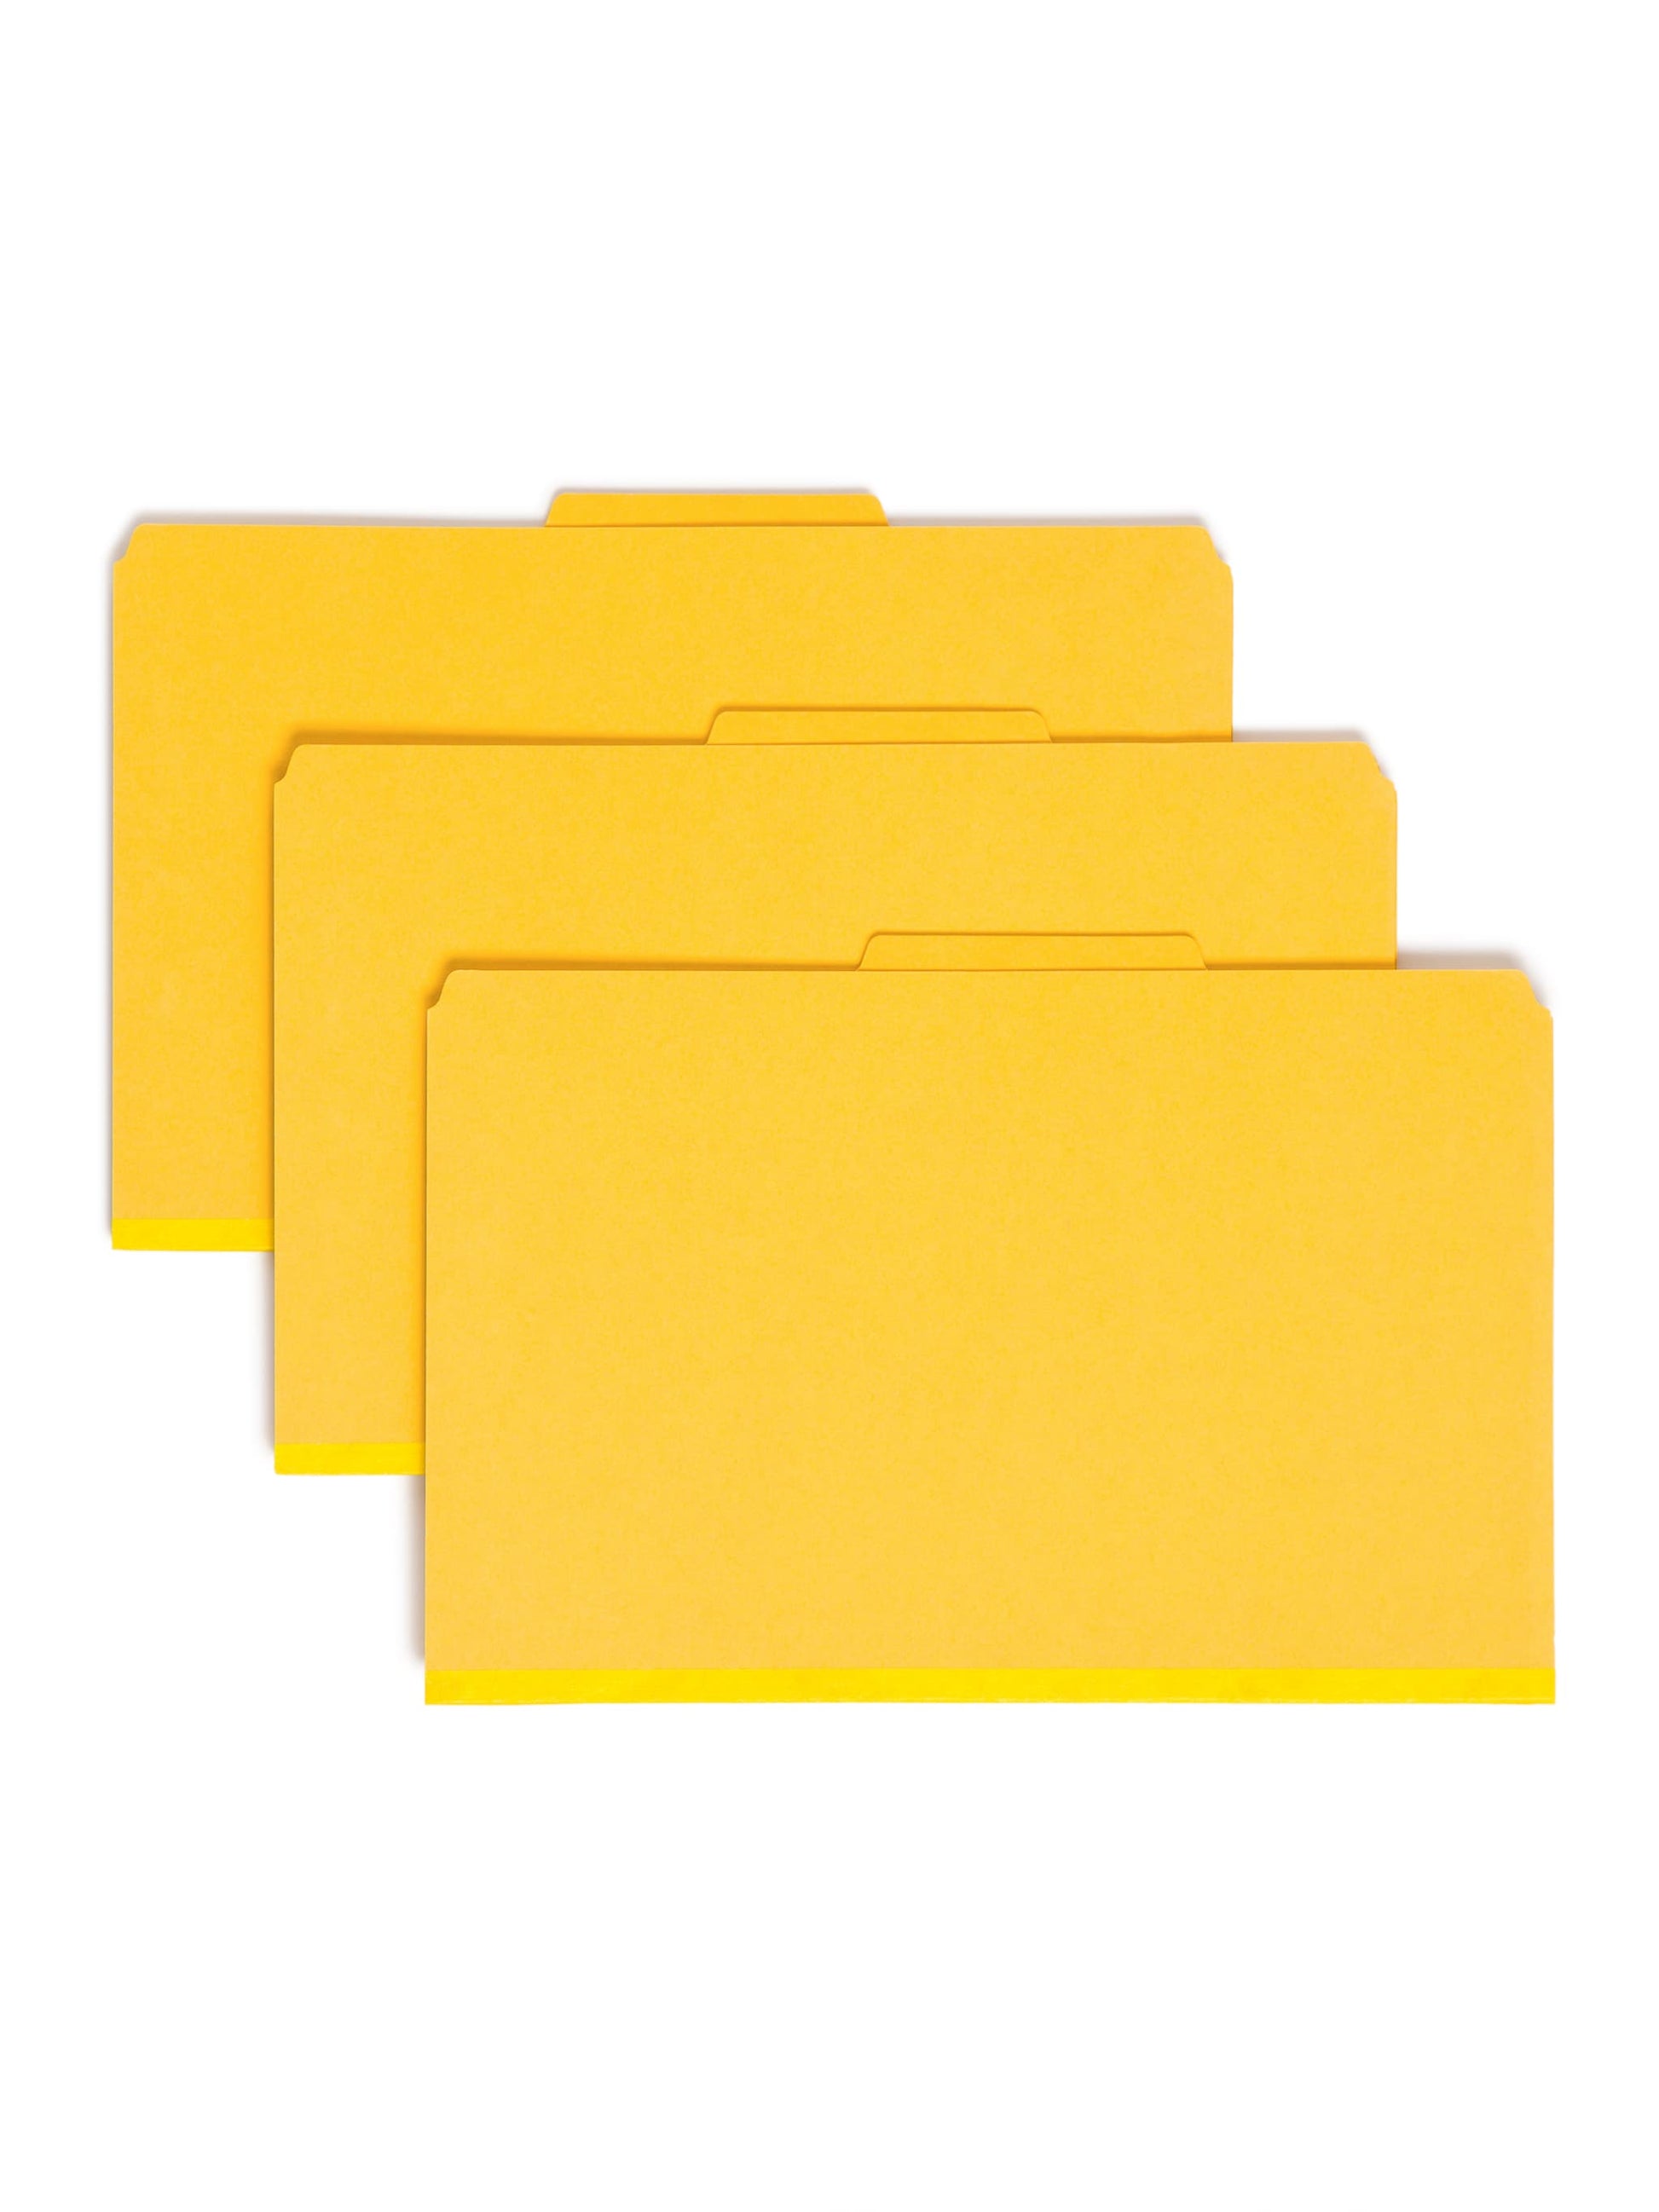 SafeSHIELD® Pressboard Classification File Folders with Pocket Dividers, Yellow Color, Legal Size, Set of 0, 30086486190849